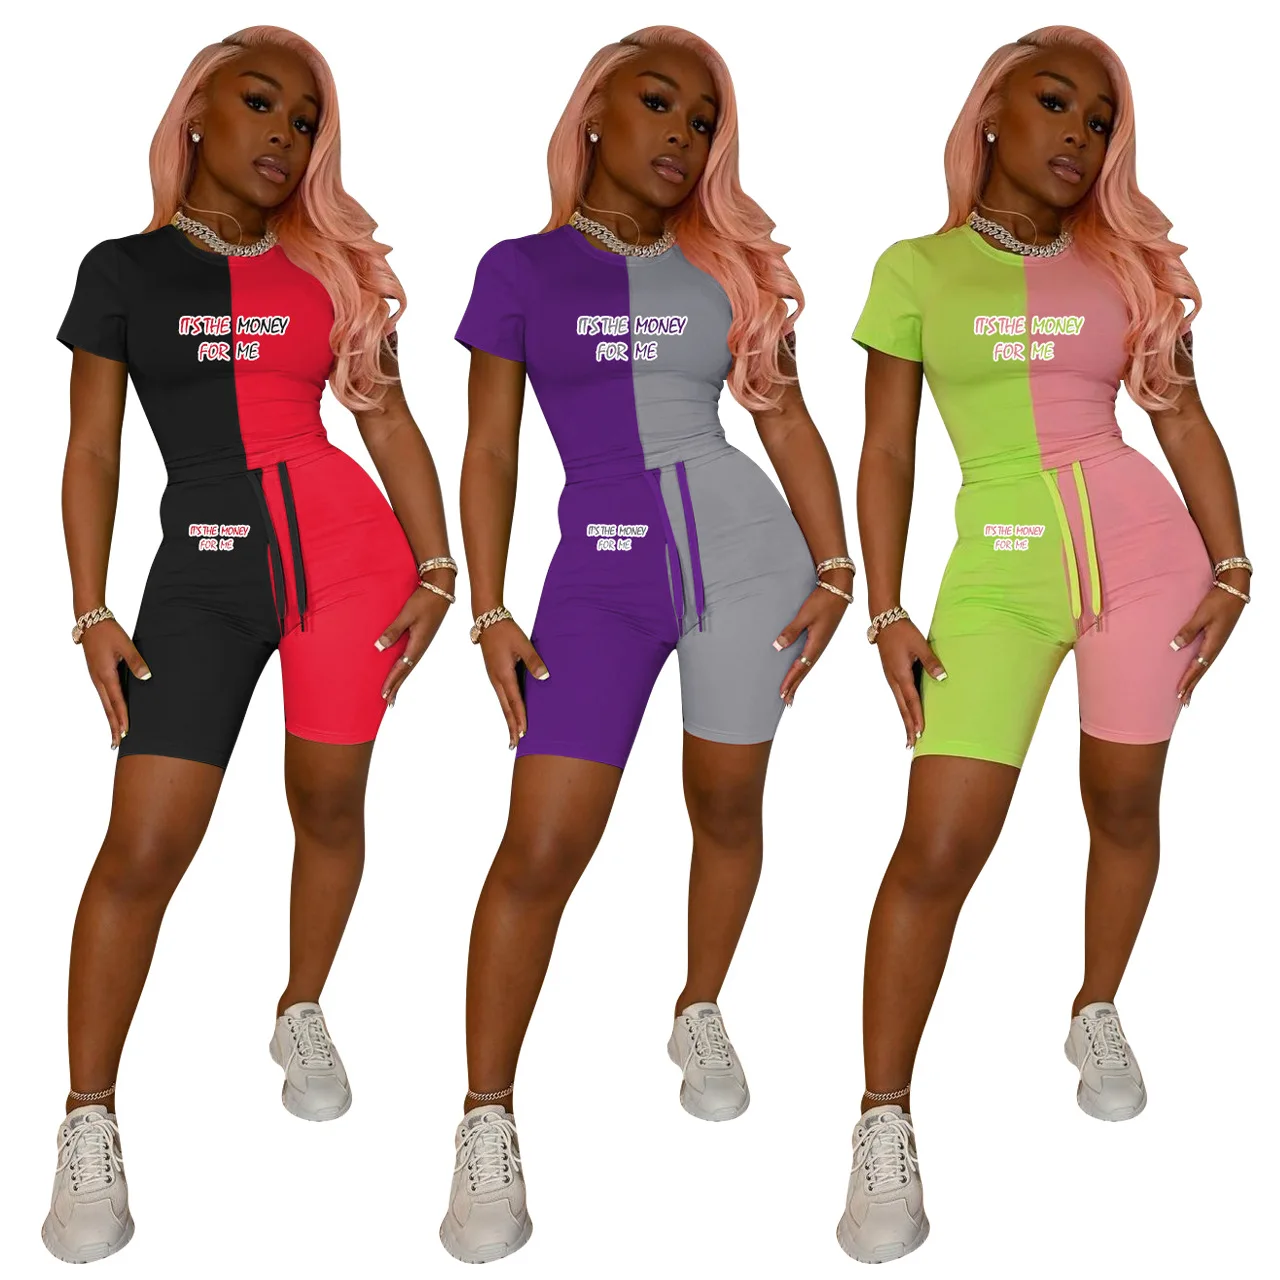 

sets it is the money for me suits women summer shorts t shirts tracksuits patchwork slim fit clothing outfits clothing